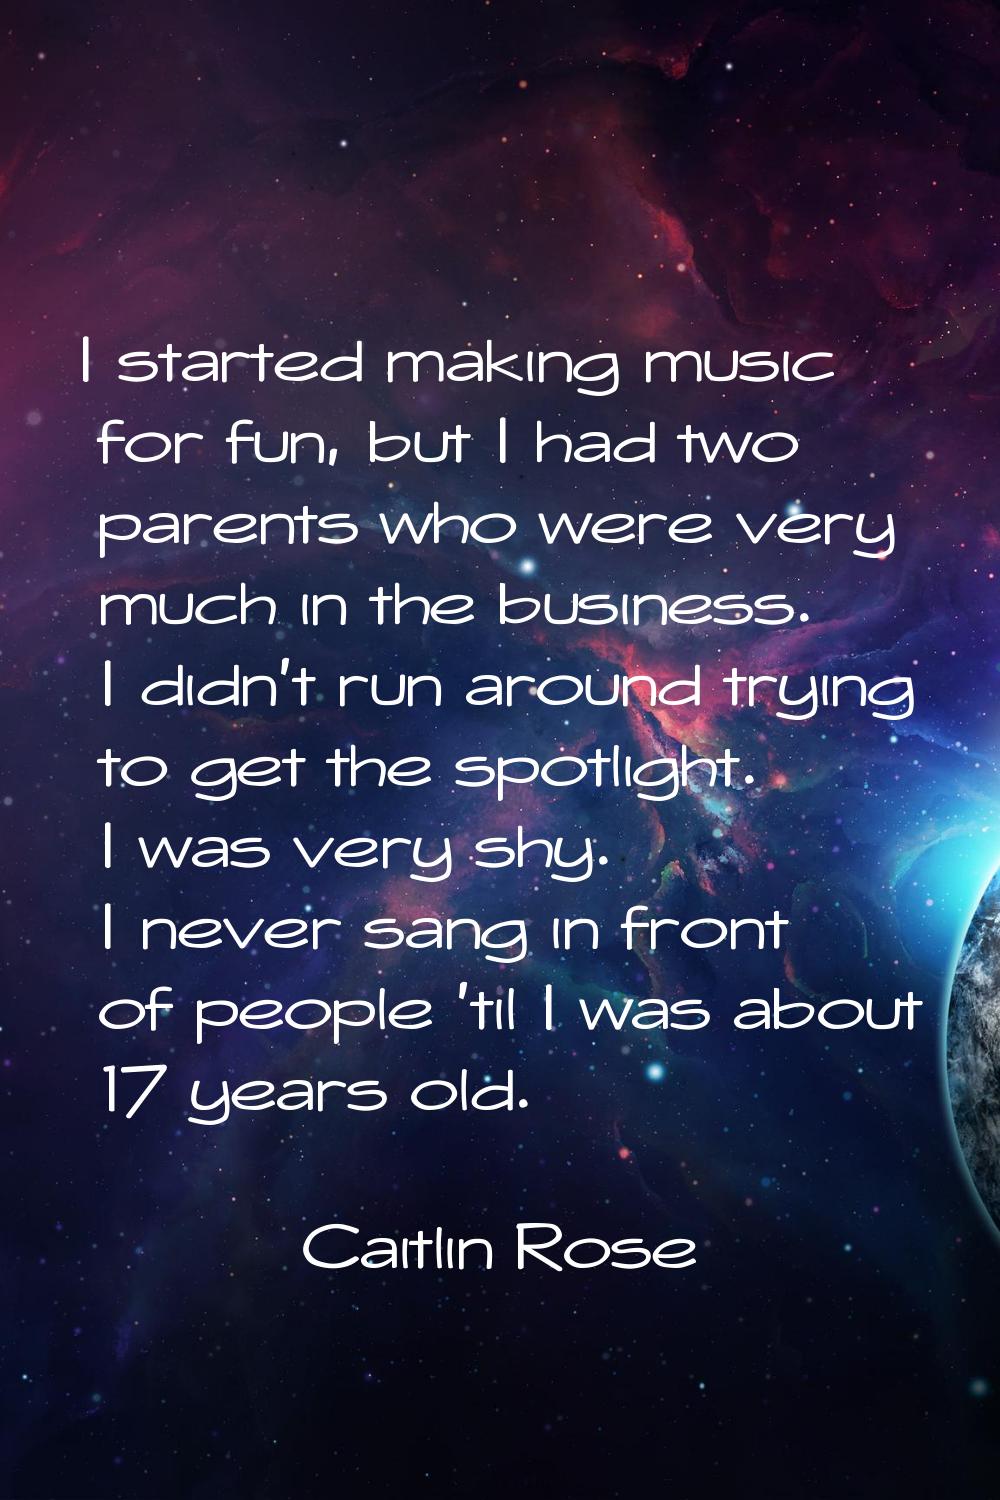 I started making music for fun, but I had two parents who were very much in the business. I didn't 